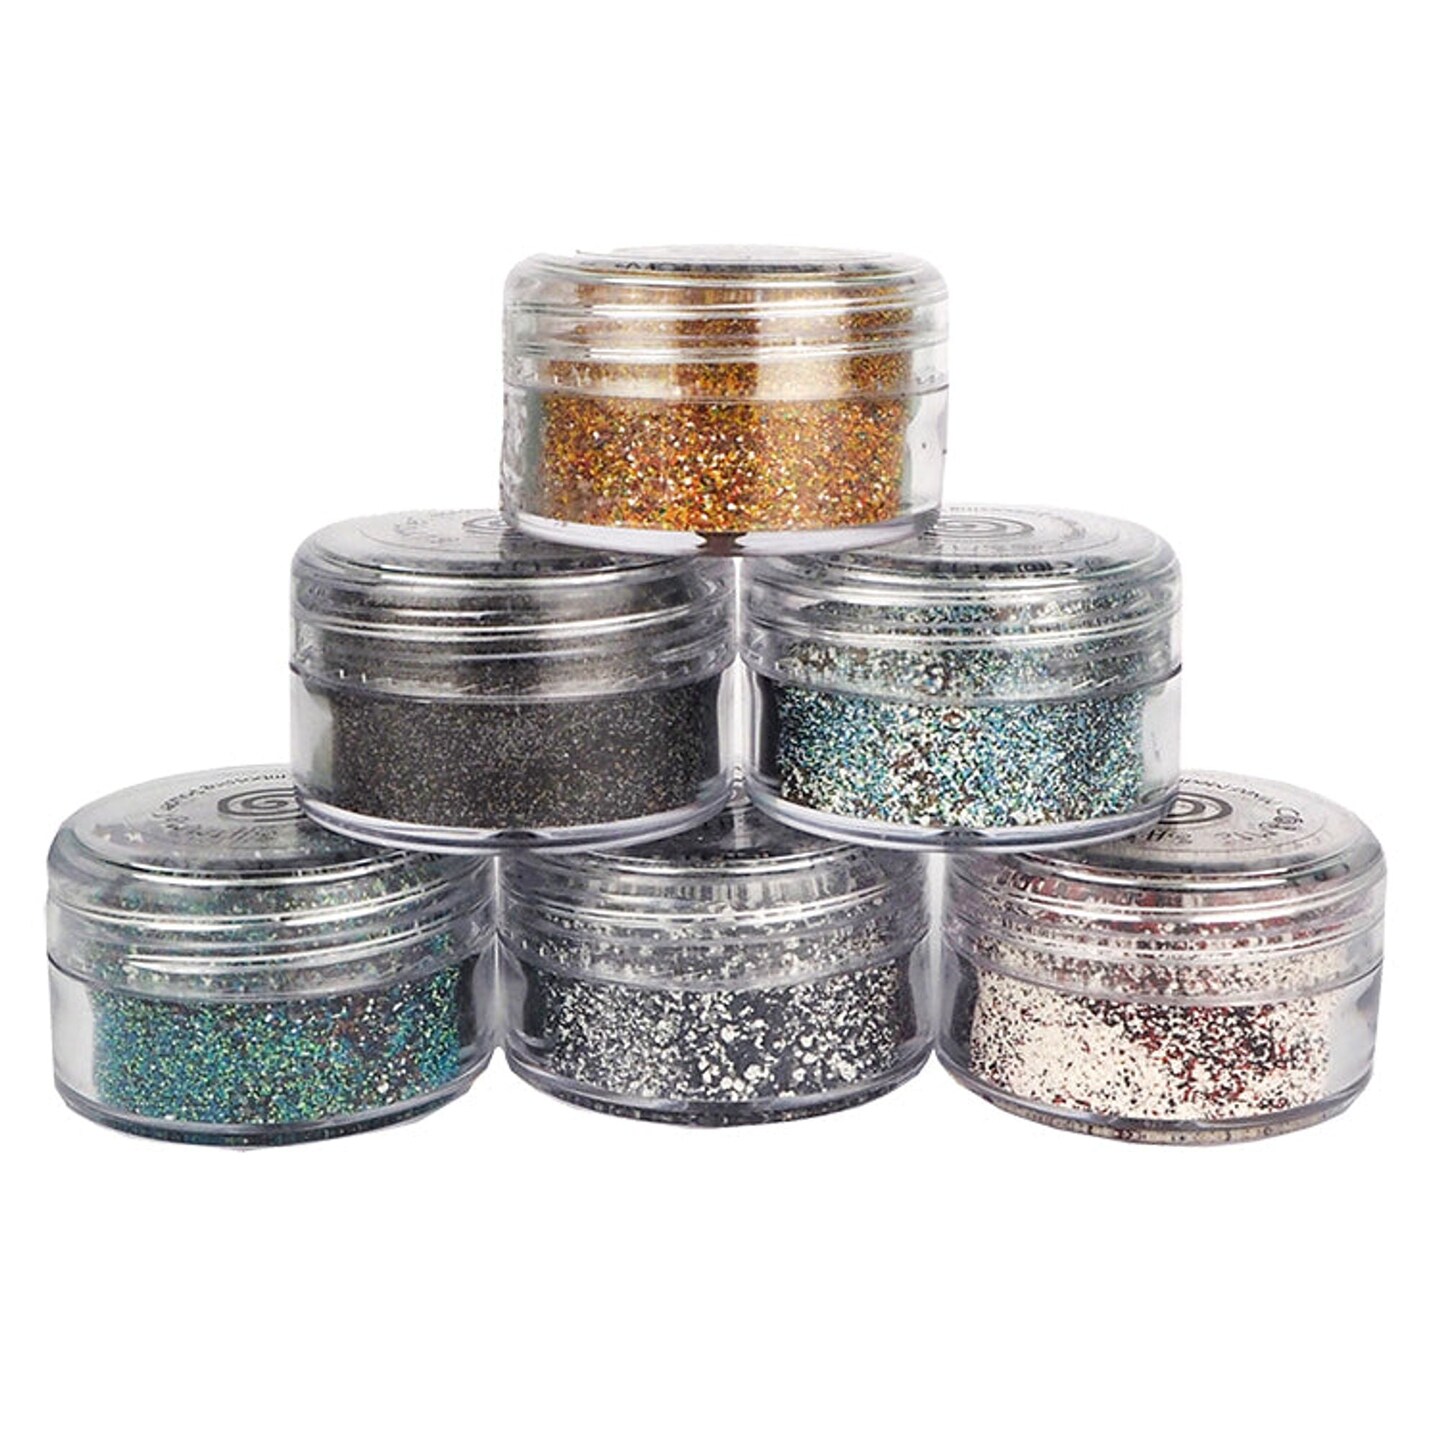 Cosmic Shimmer  Mixed Media Embossing Powder - Bronze Age